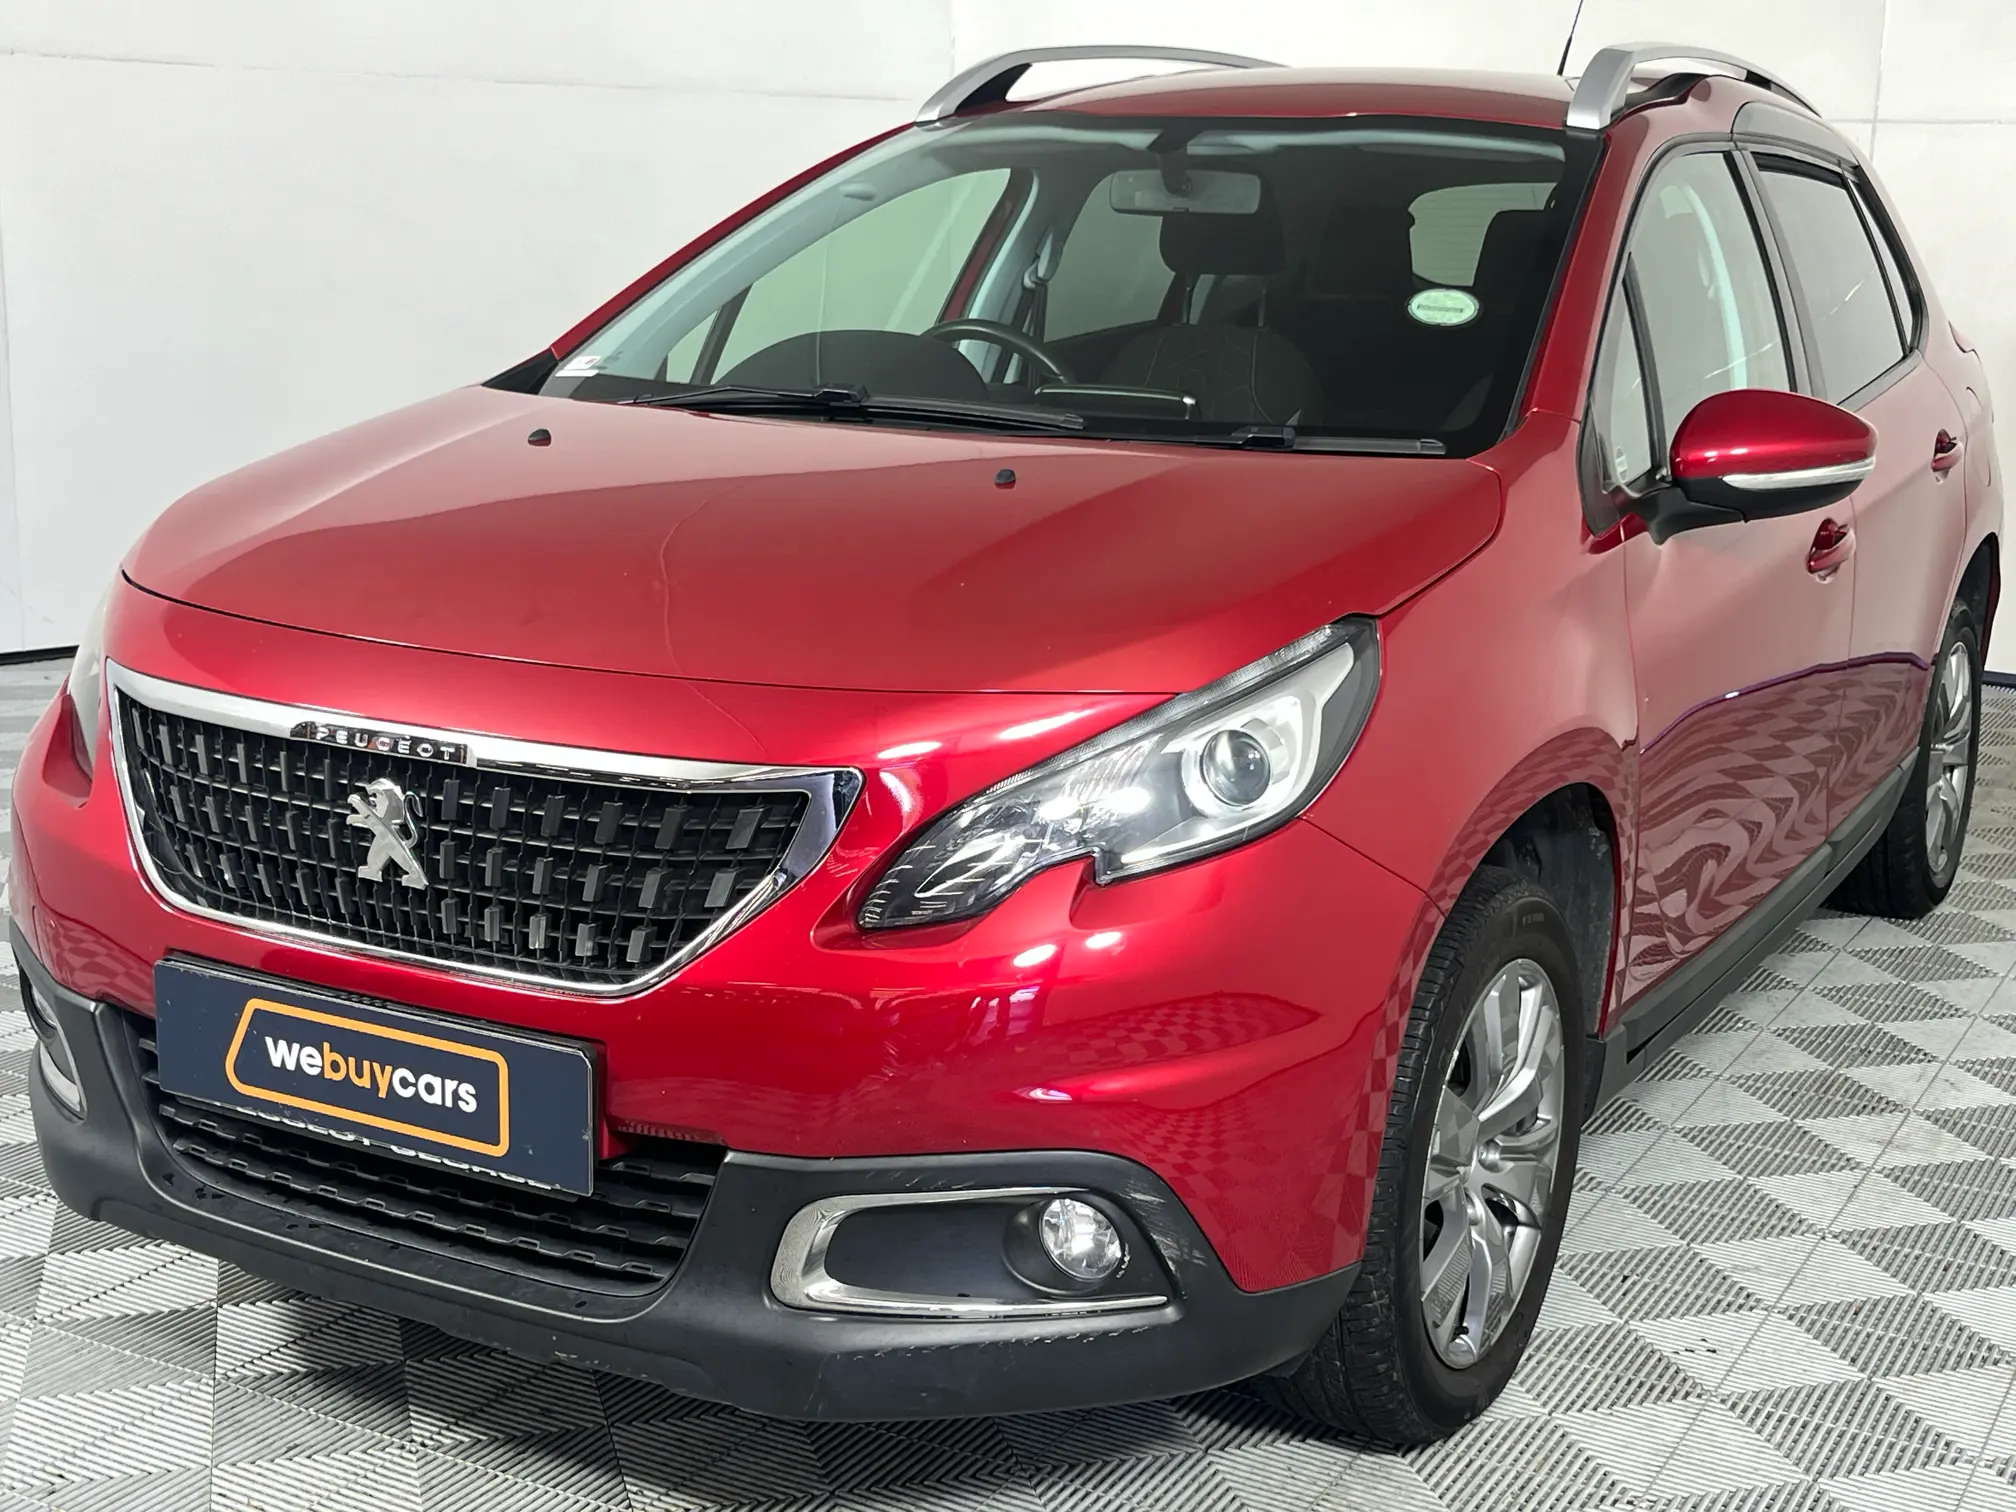 2018 Peugeot 2008 1.6 HDI Active